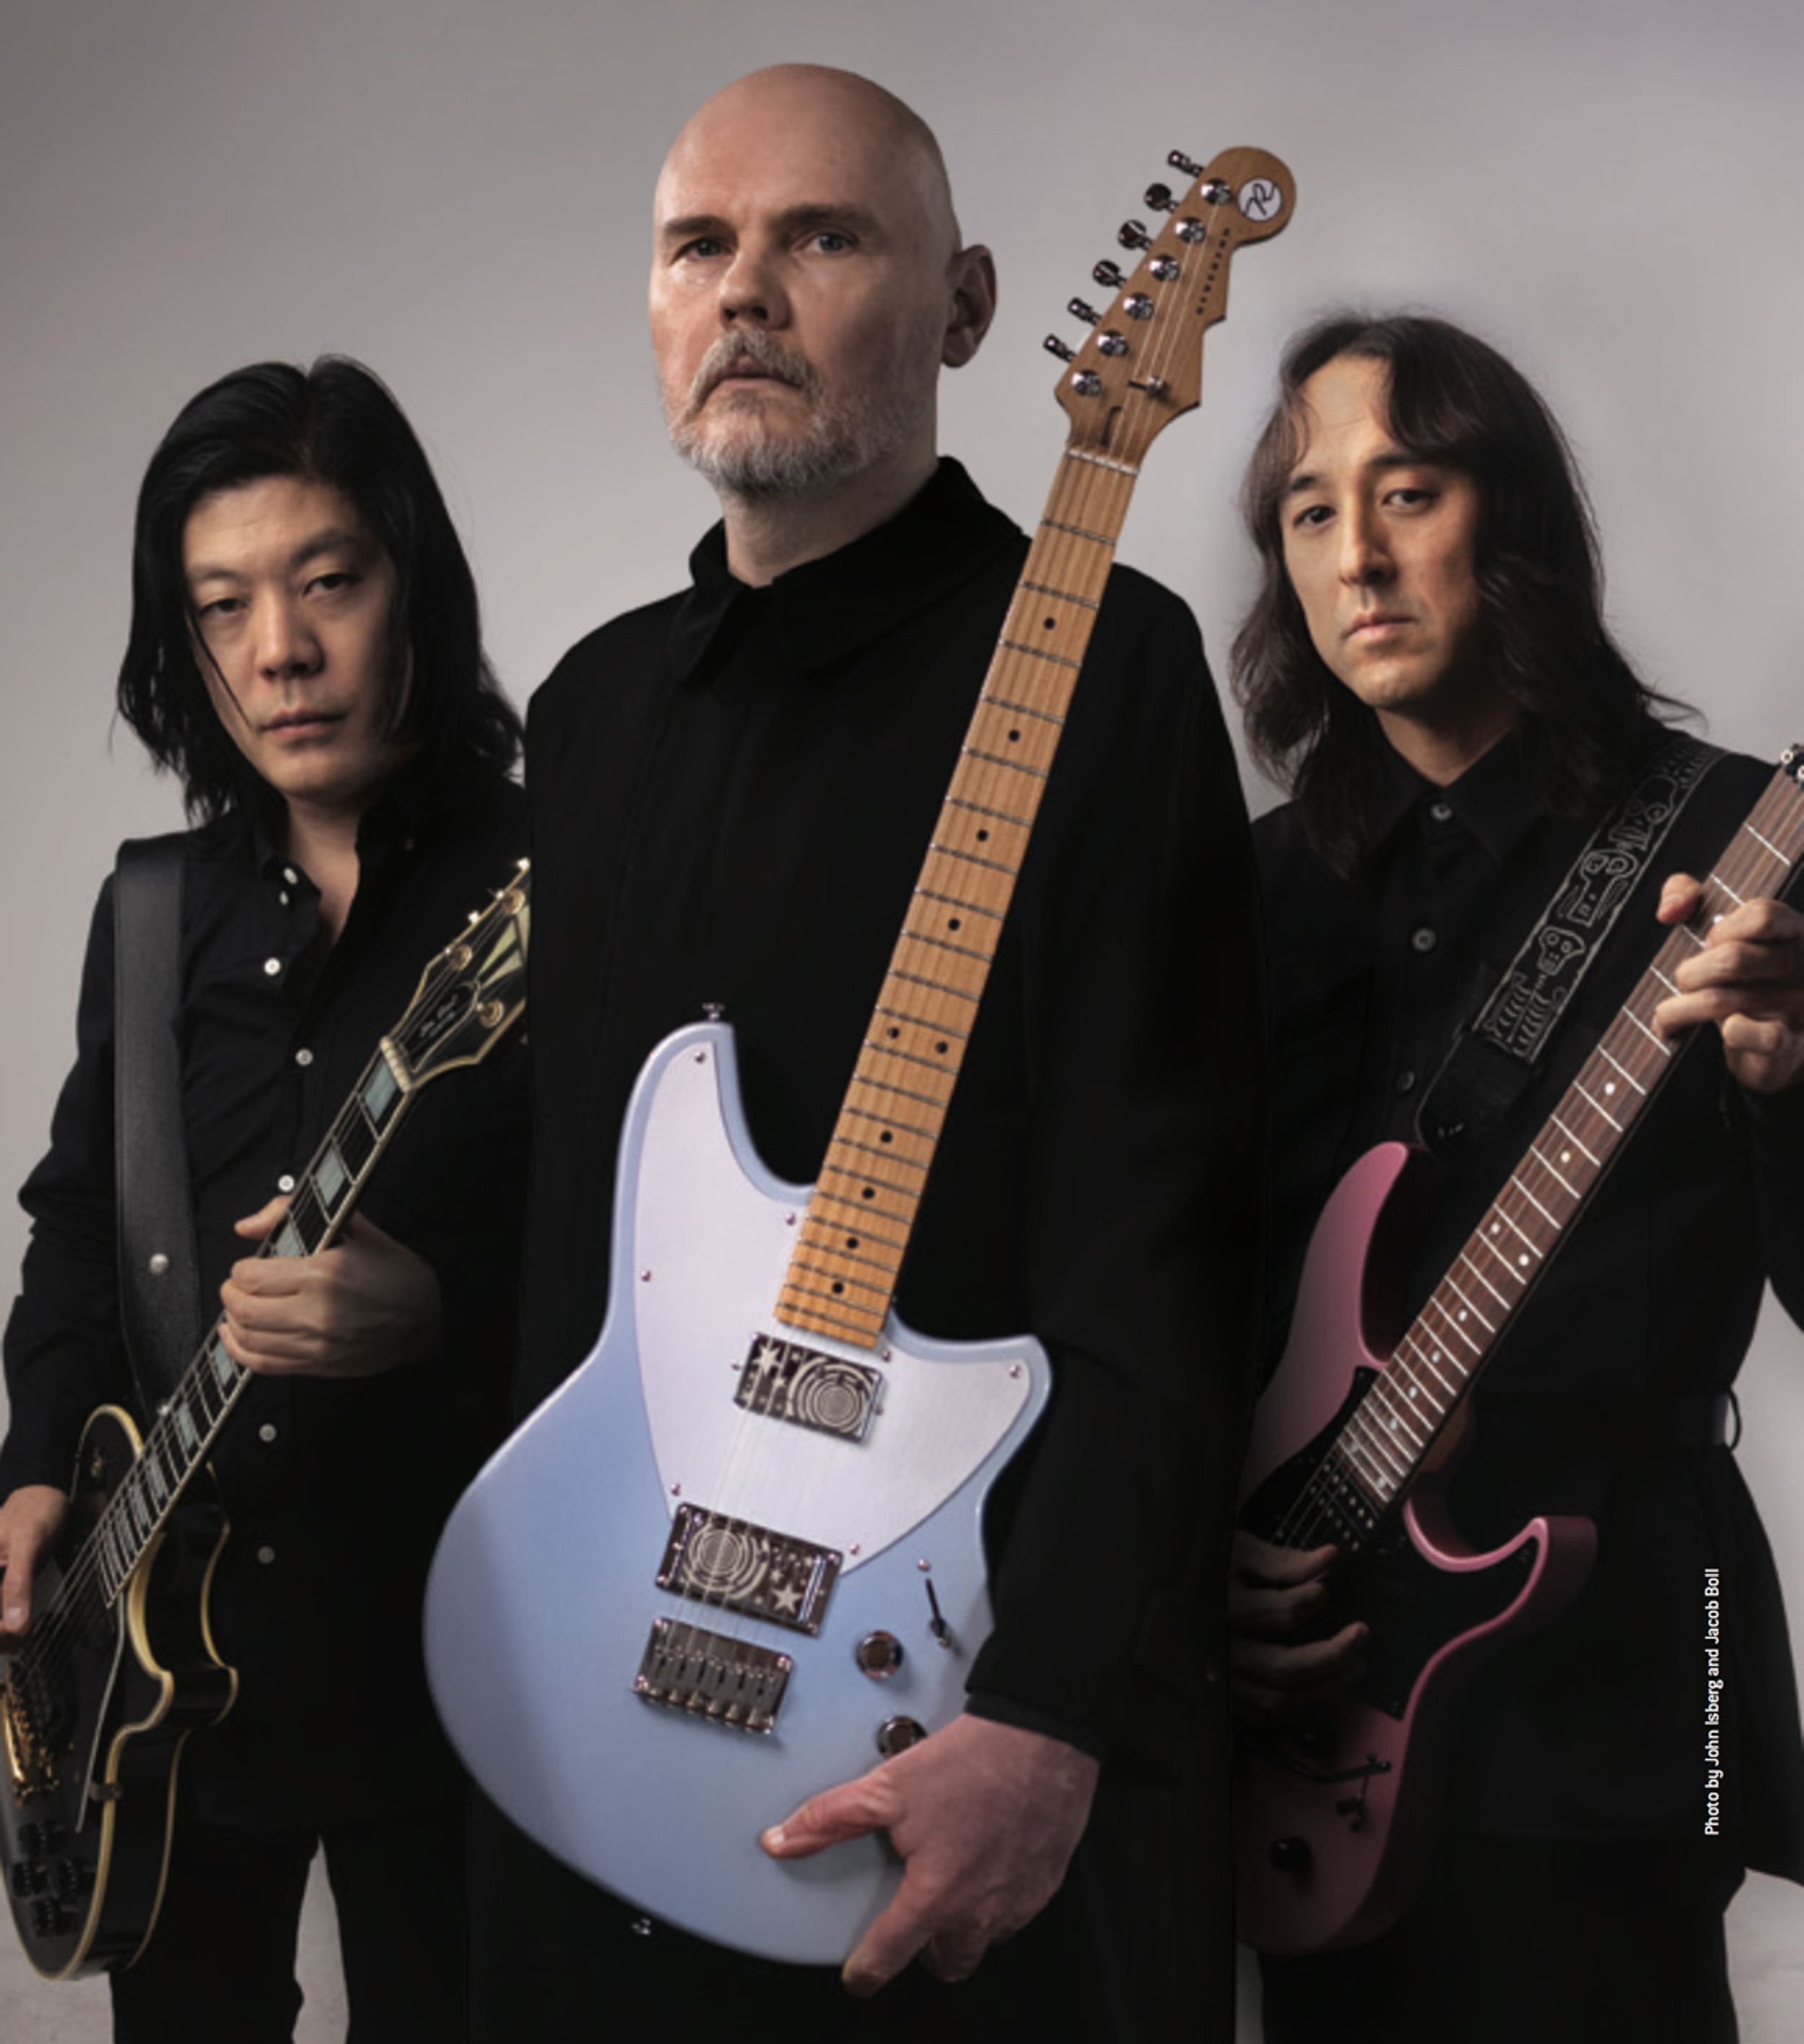 Billy Corgan on Smashing Pumpkins’ New Mellon Collie Sequel: “Now’s the Time.”